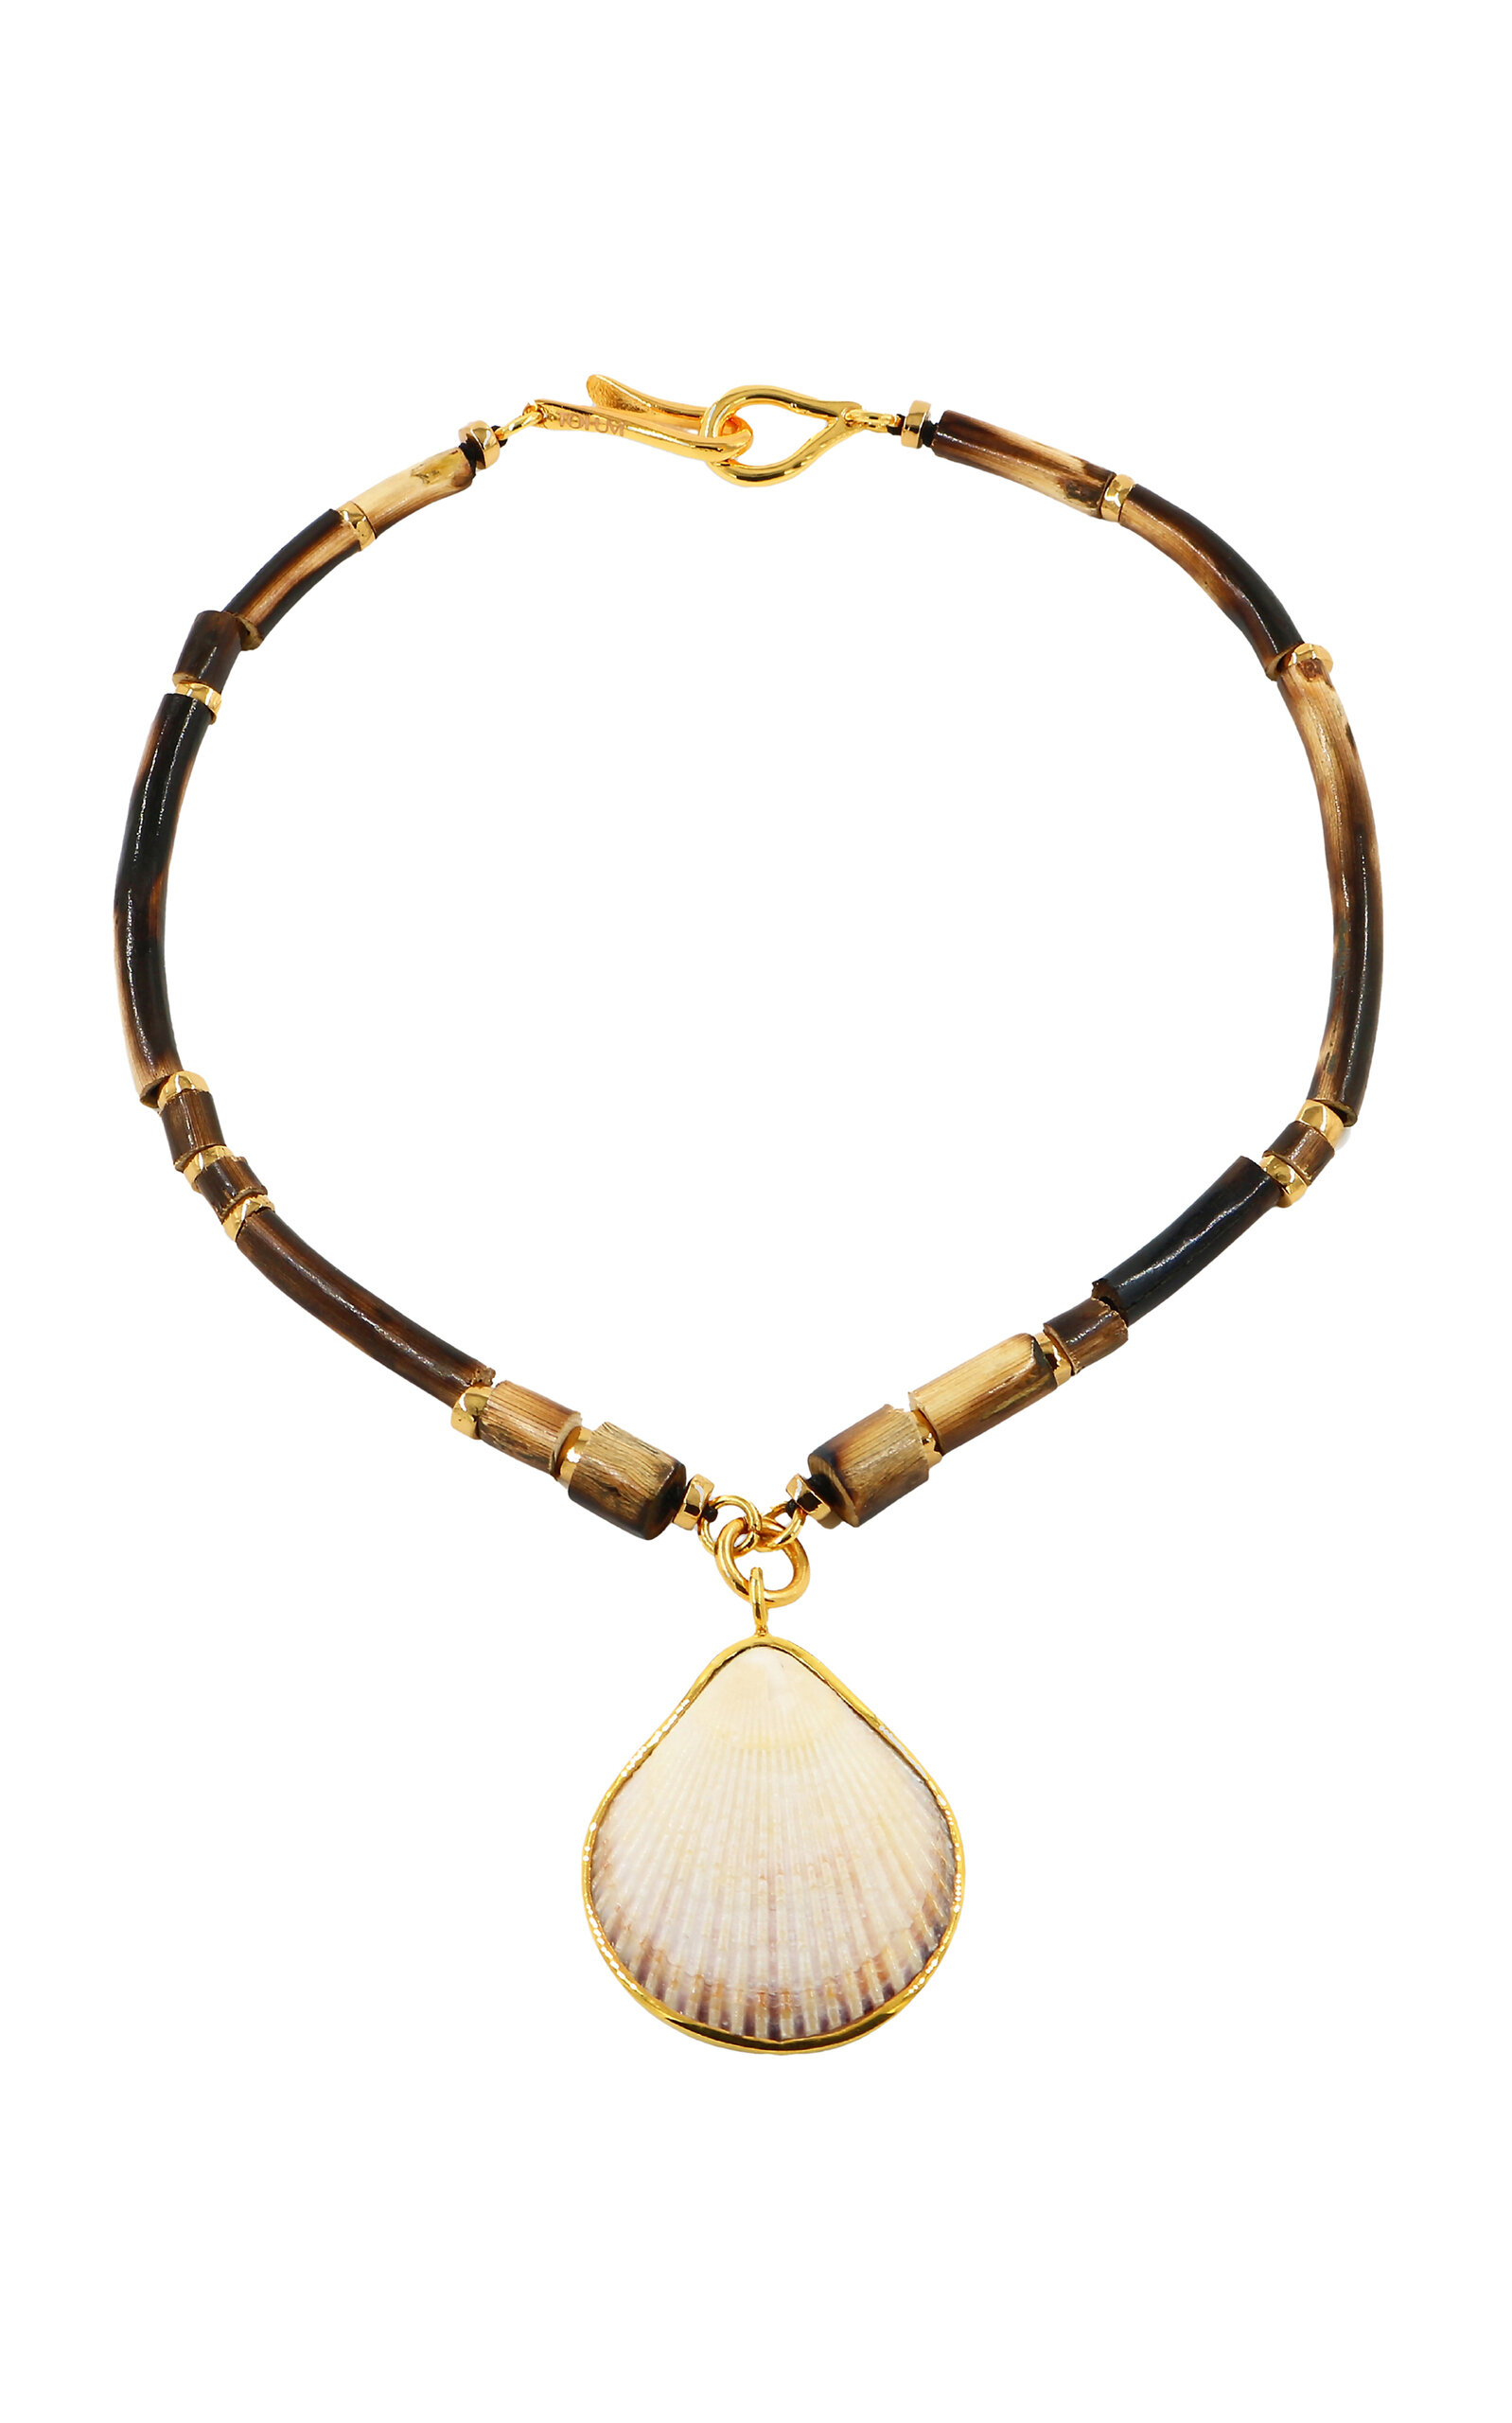 Samsara Horn Beads and Shell Necklace